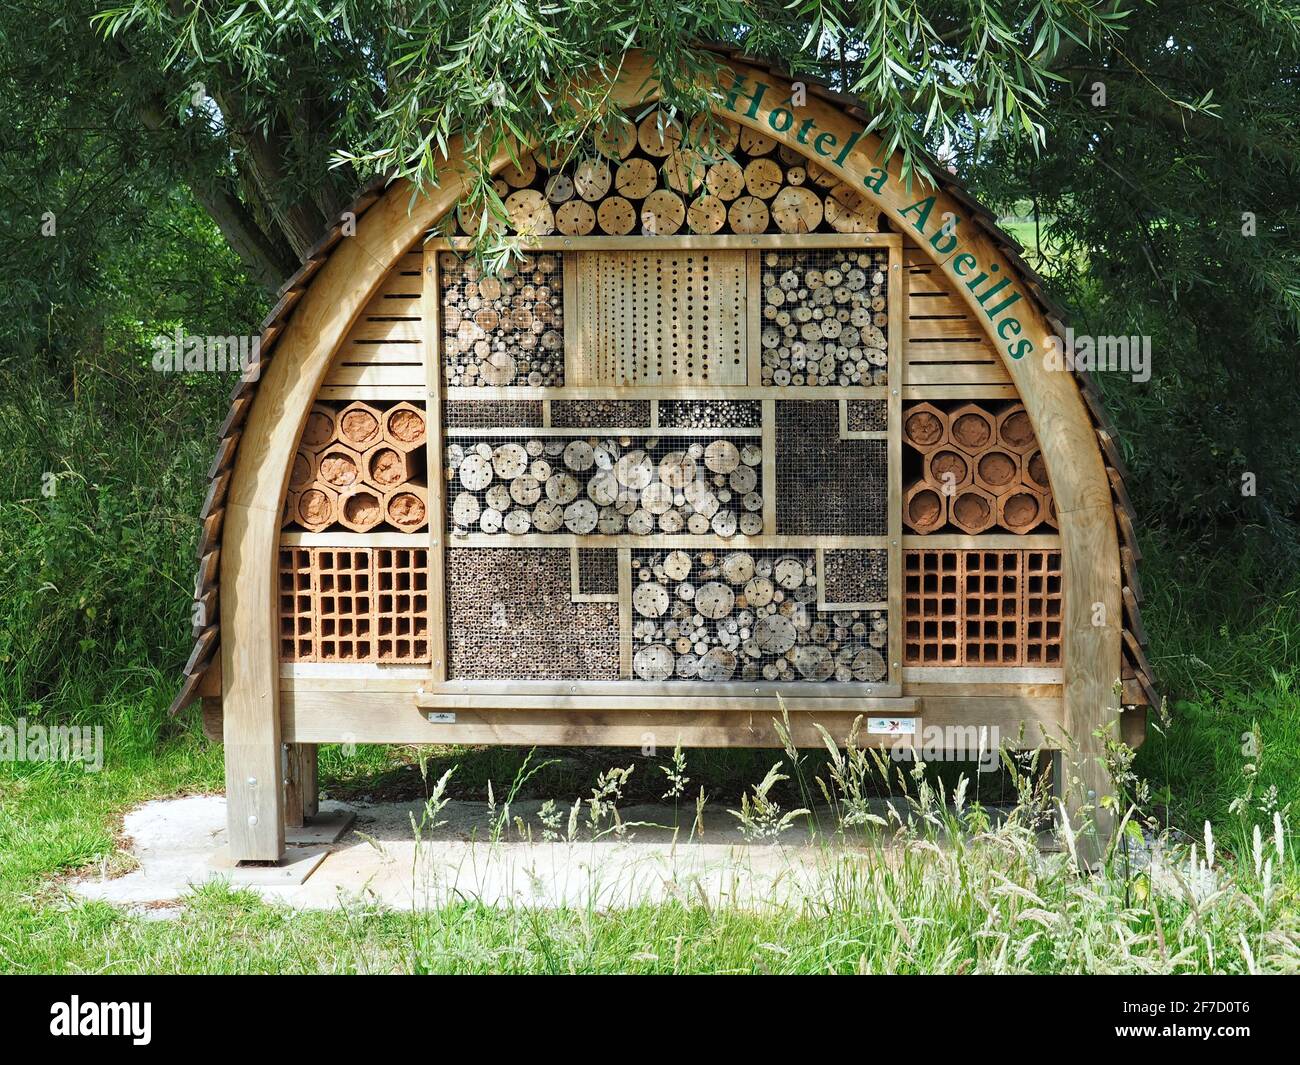 Wooden insect hotel in the garden in Bayeux, France Stock Photo